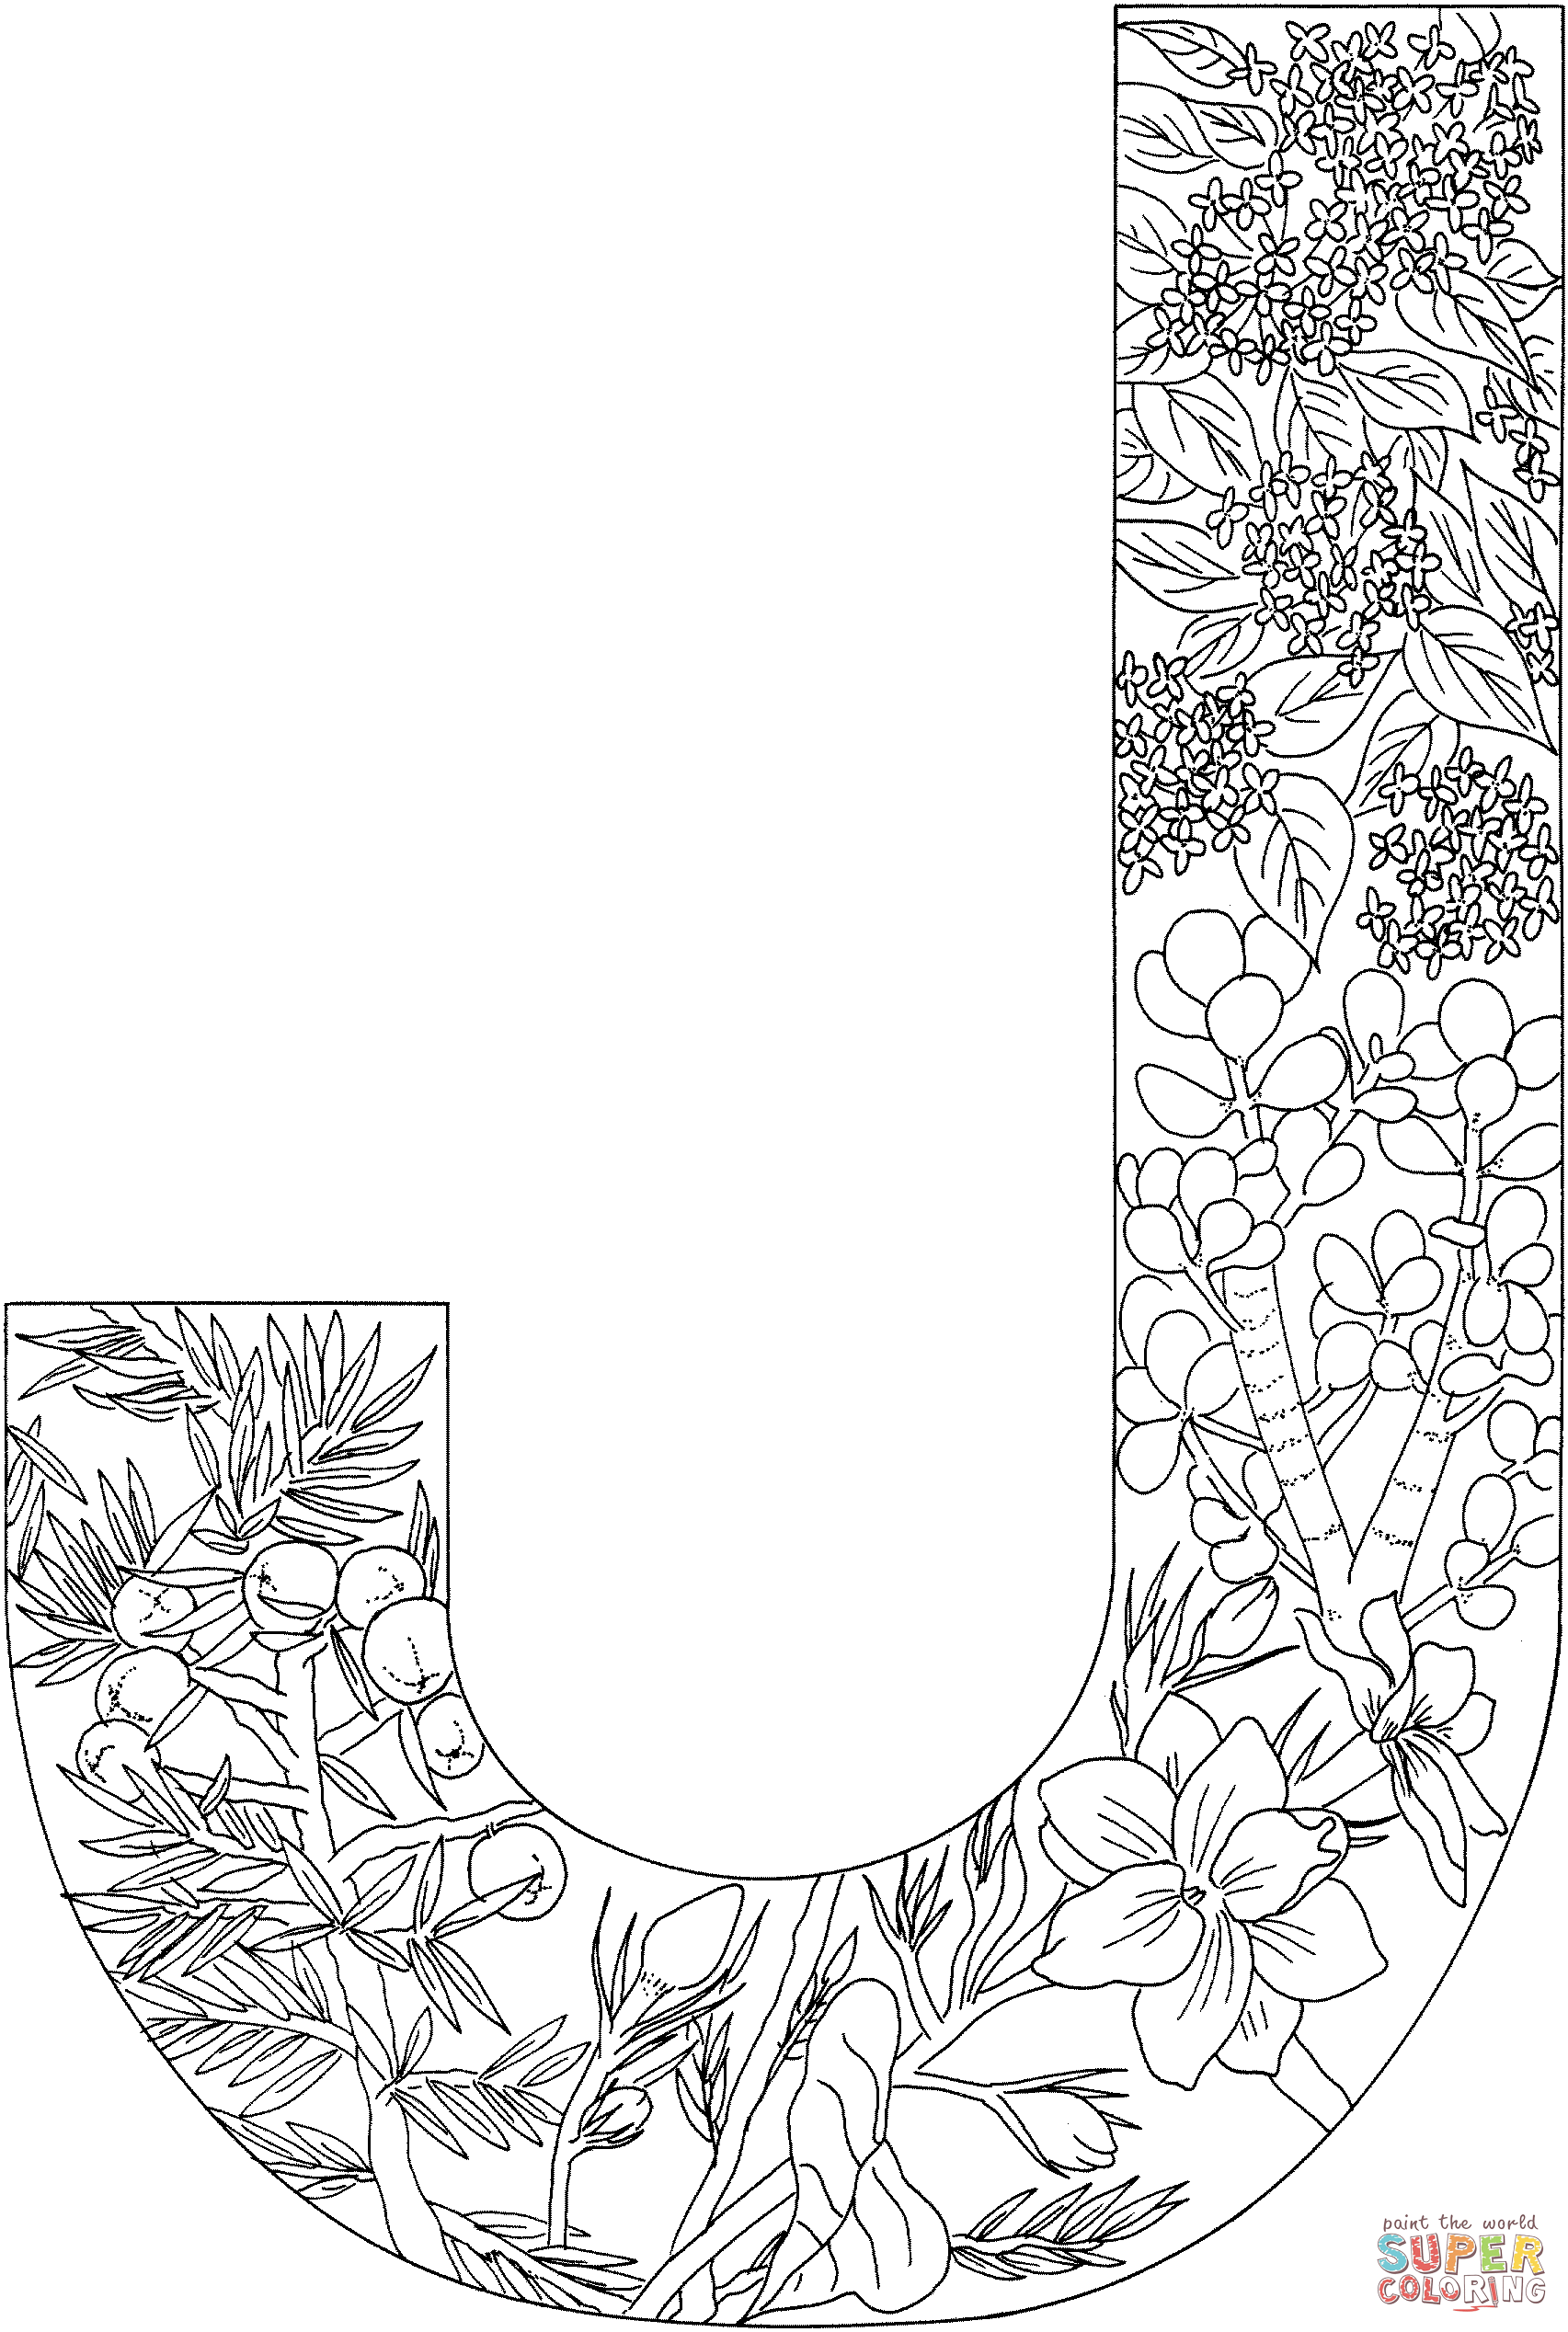 Letter J With Plants Coloring Page Free Printable Coloring Pages Name Coloring Pages